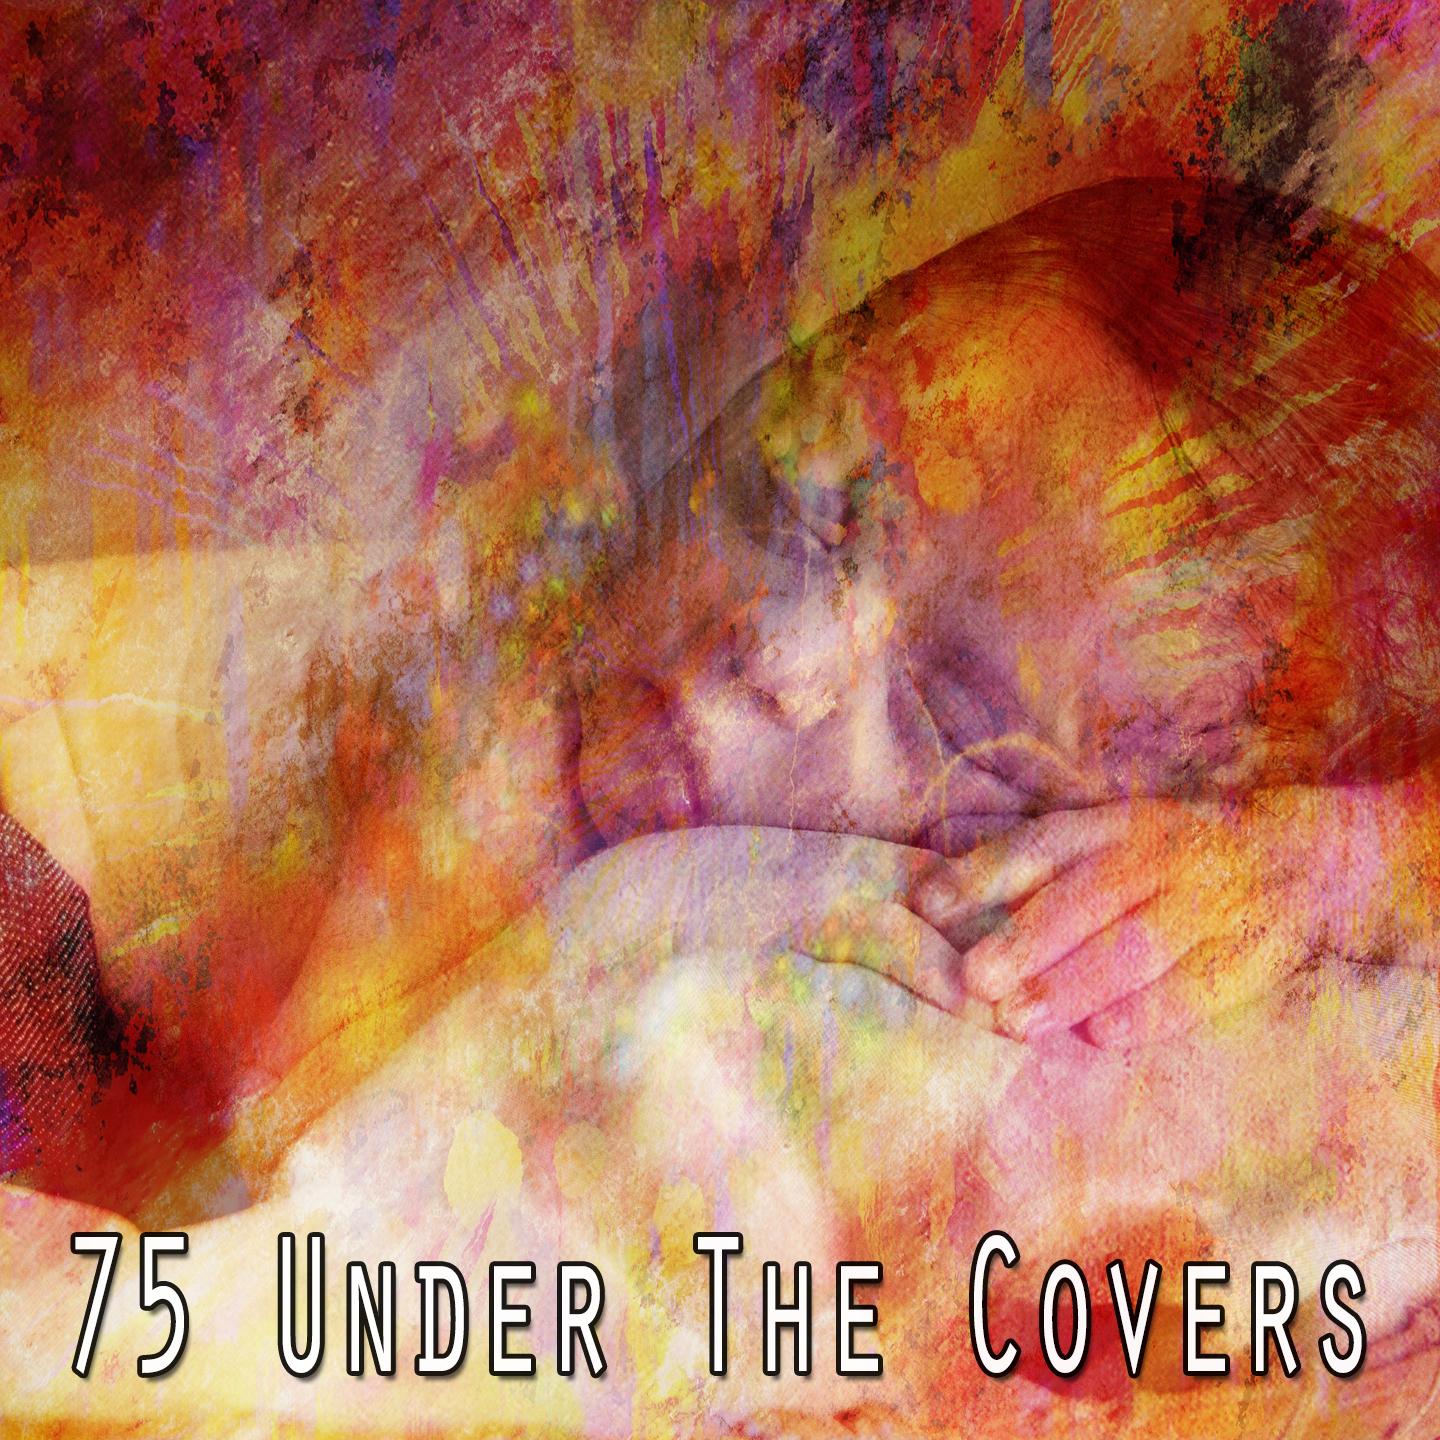 75 Under the Covers